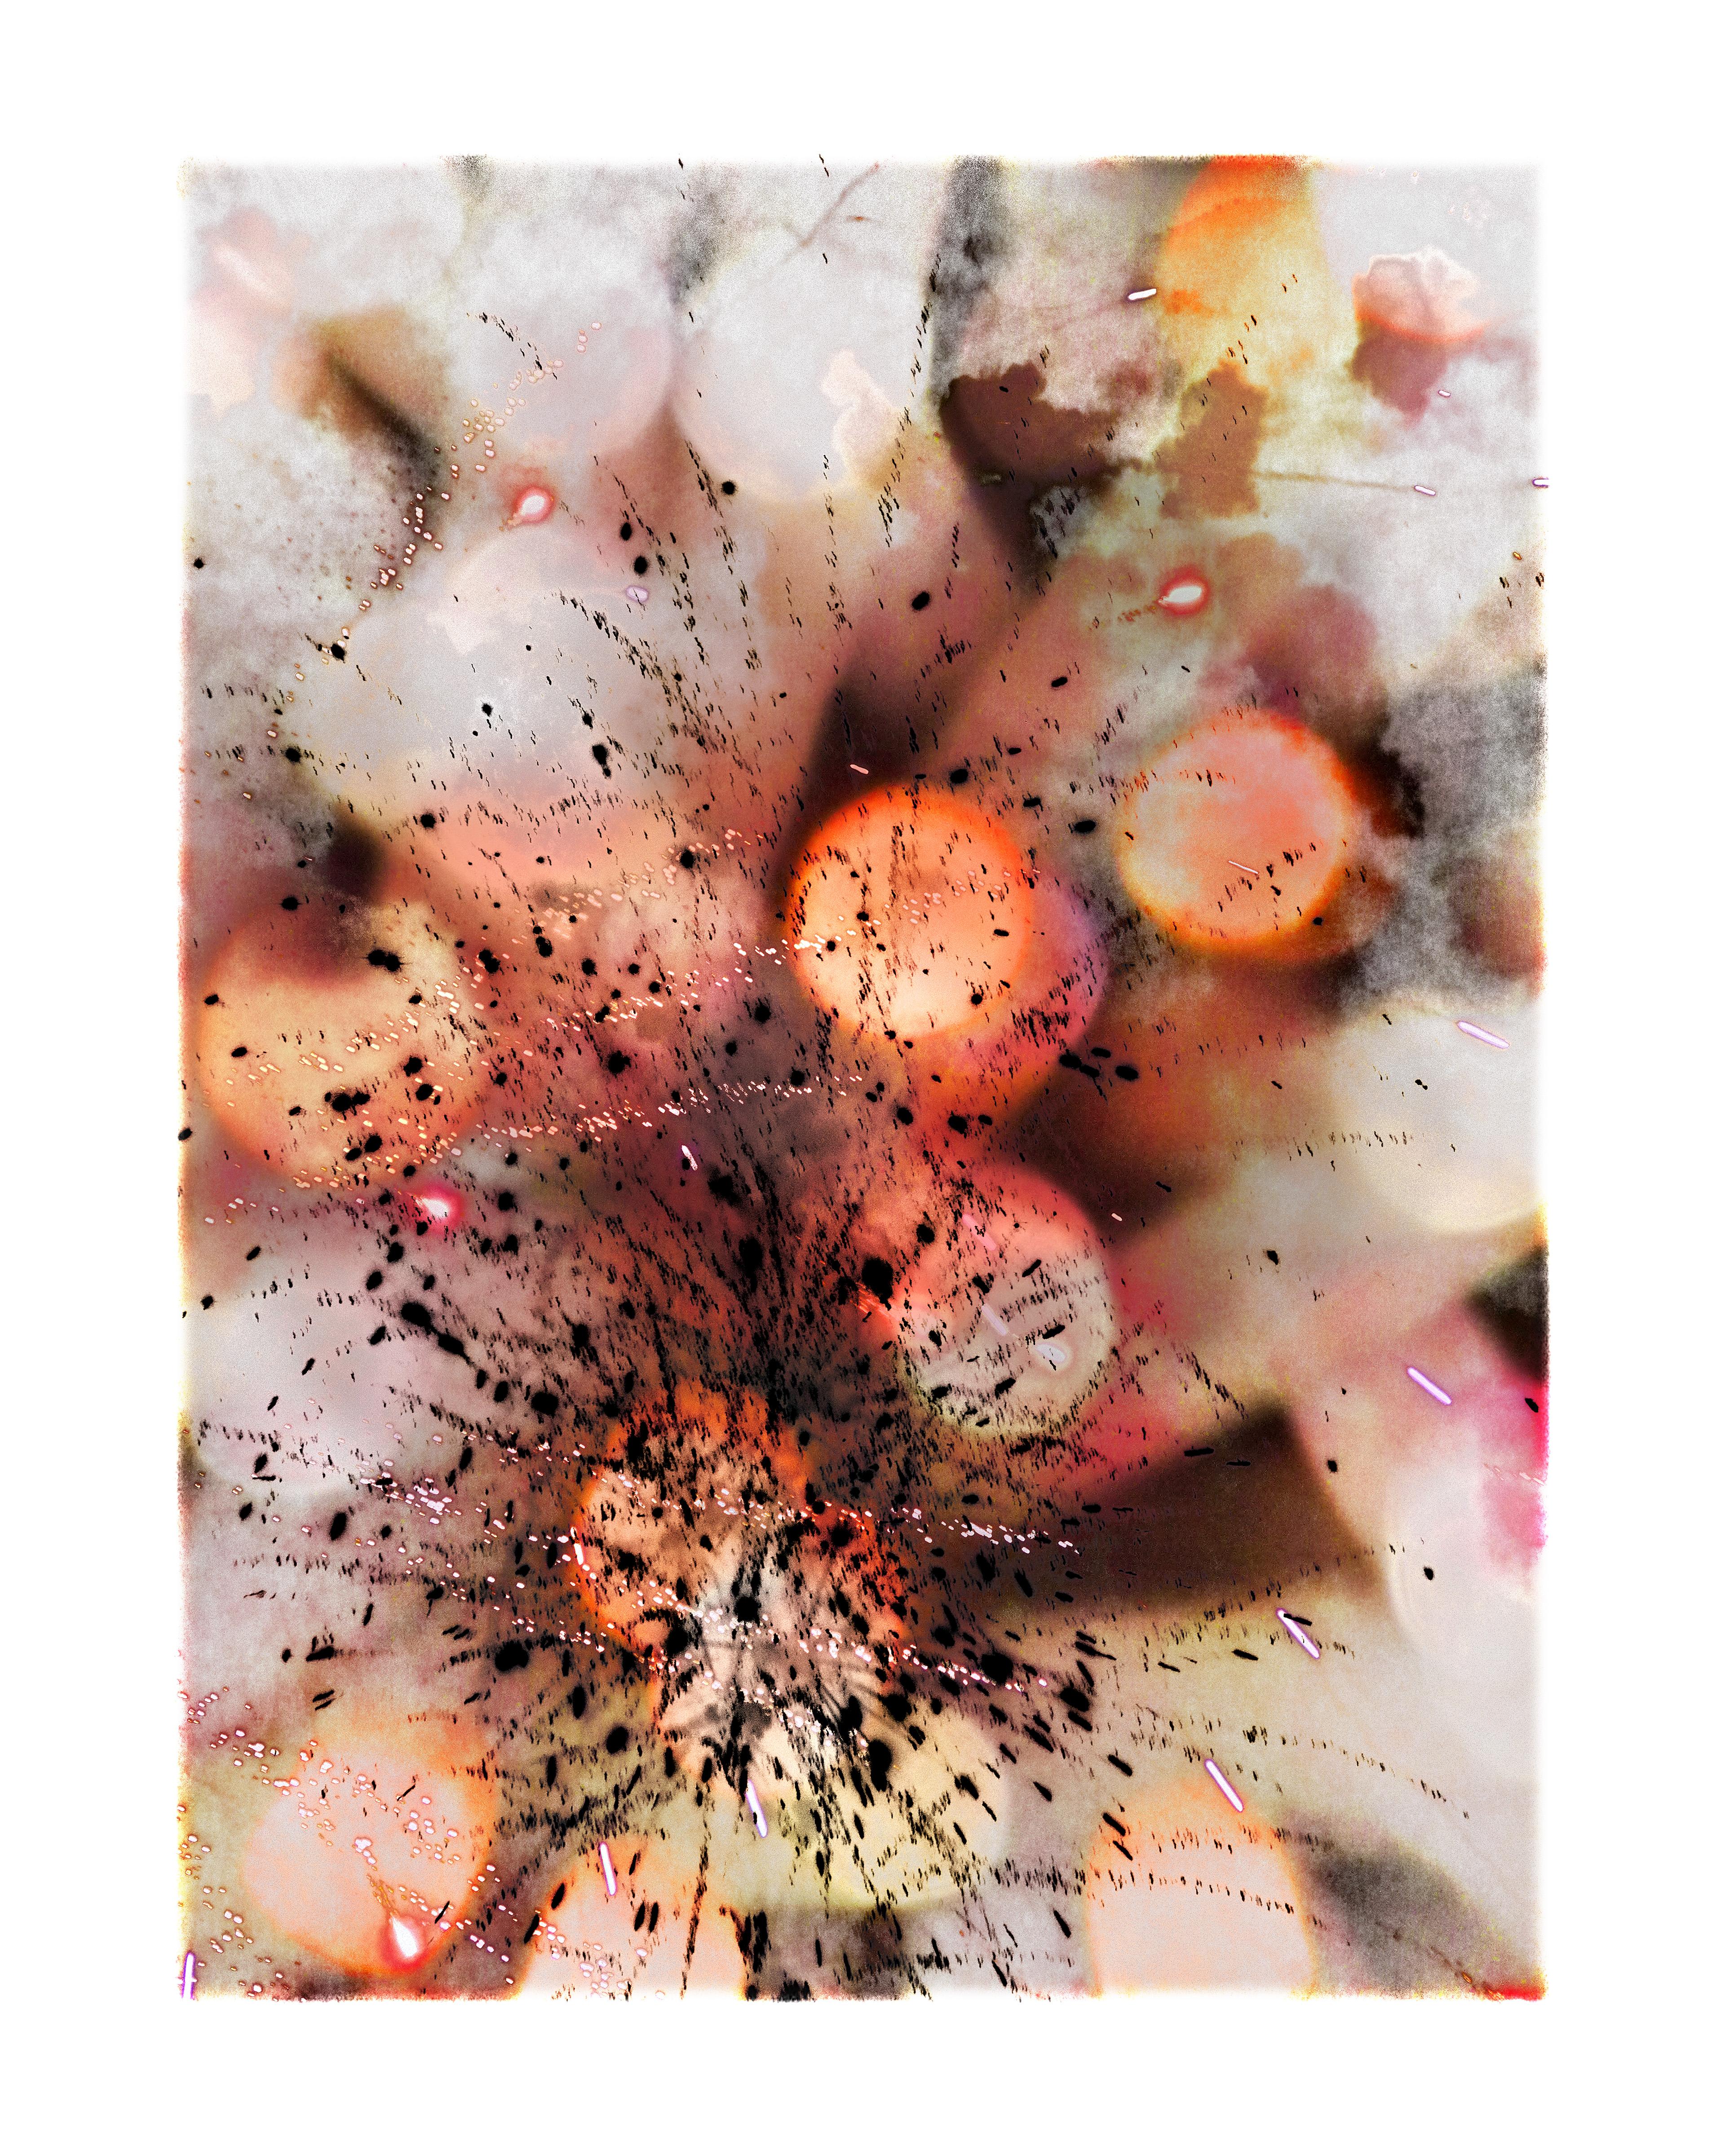 "Explosure, #31" by Tom & Lois White is available as a hand-signed and numbered archival pigment print on heavyweight cold press cotton rag paper in the following editions: 
40x52in; edition of 3
26x36in; edition of 12

*Custom framing options